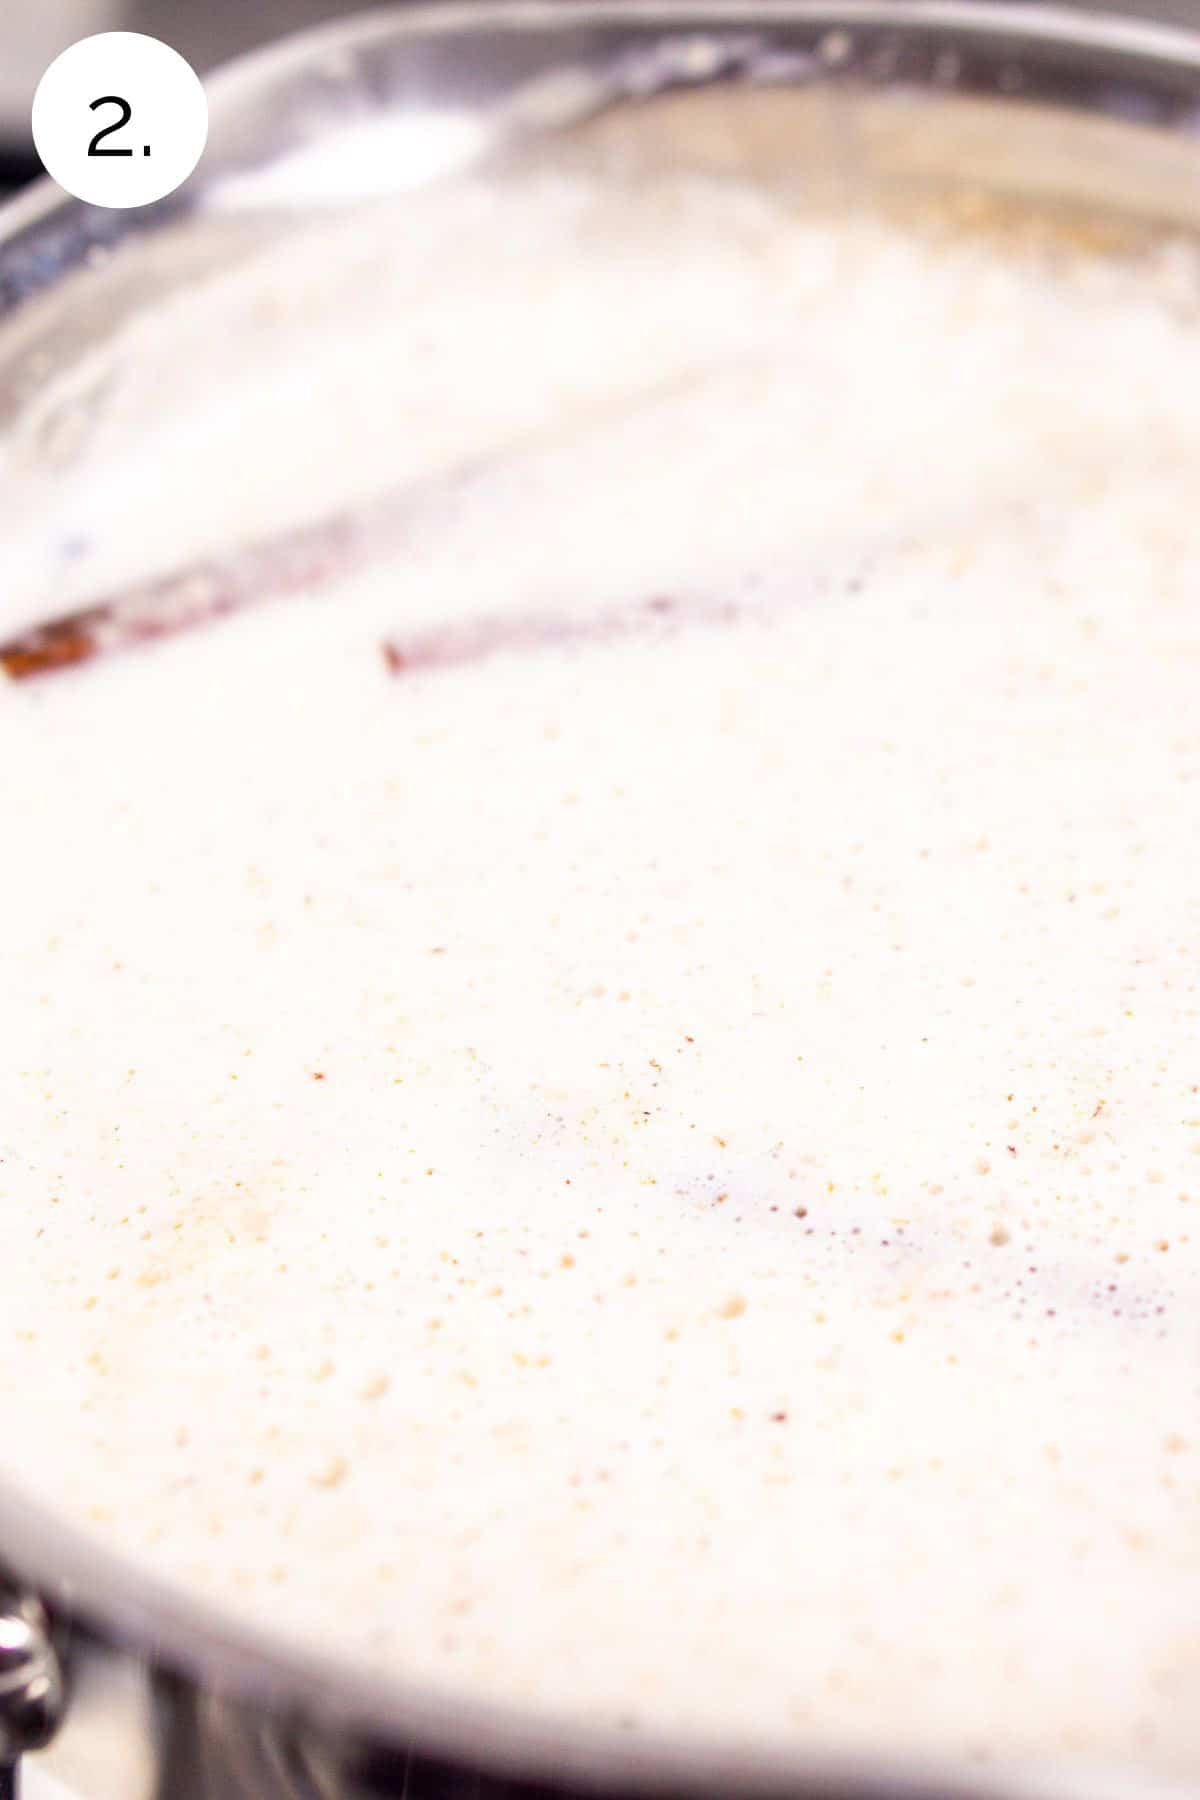 The milk and cream mixture in a small saucepan with cinnamon sticks on the stove-top.